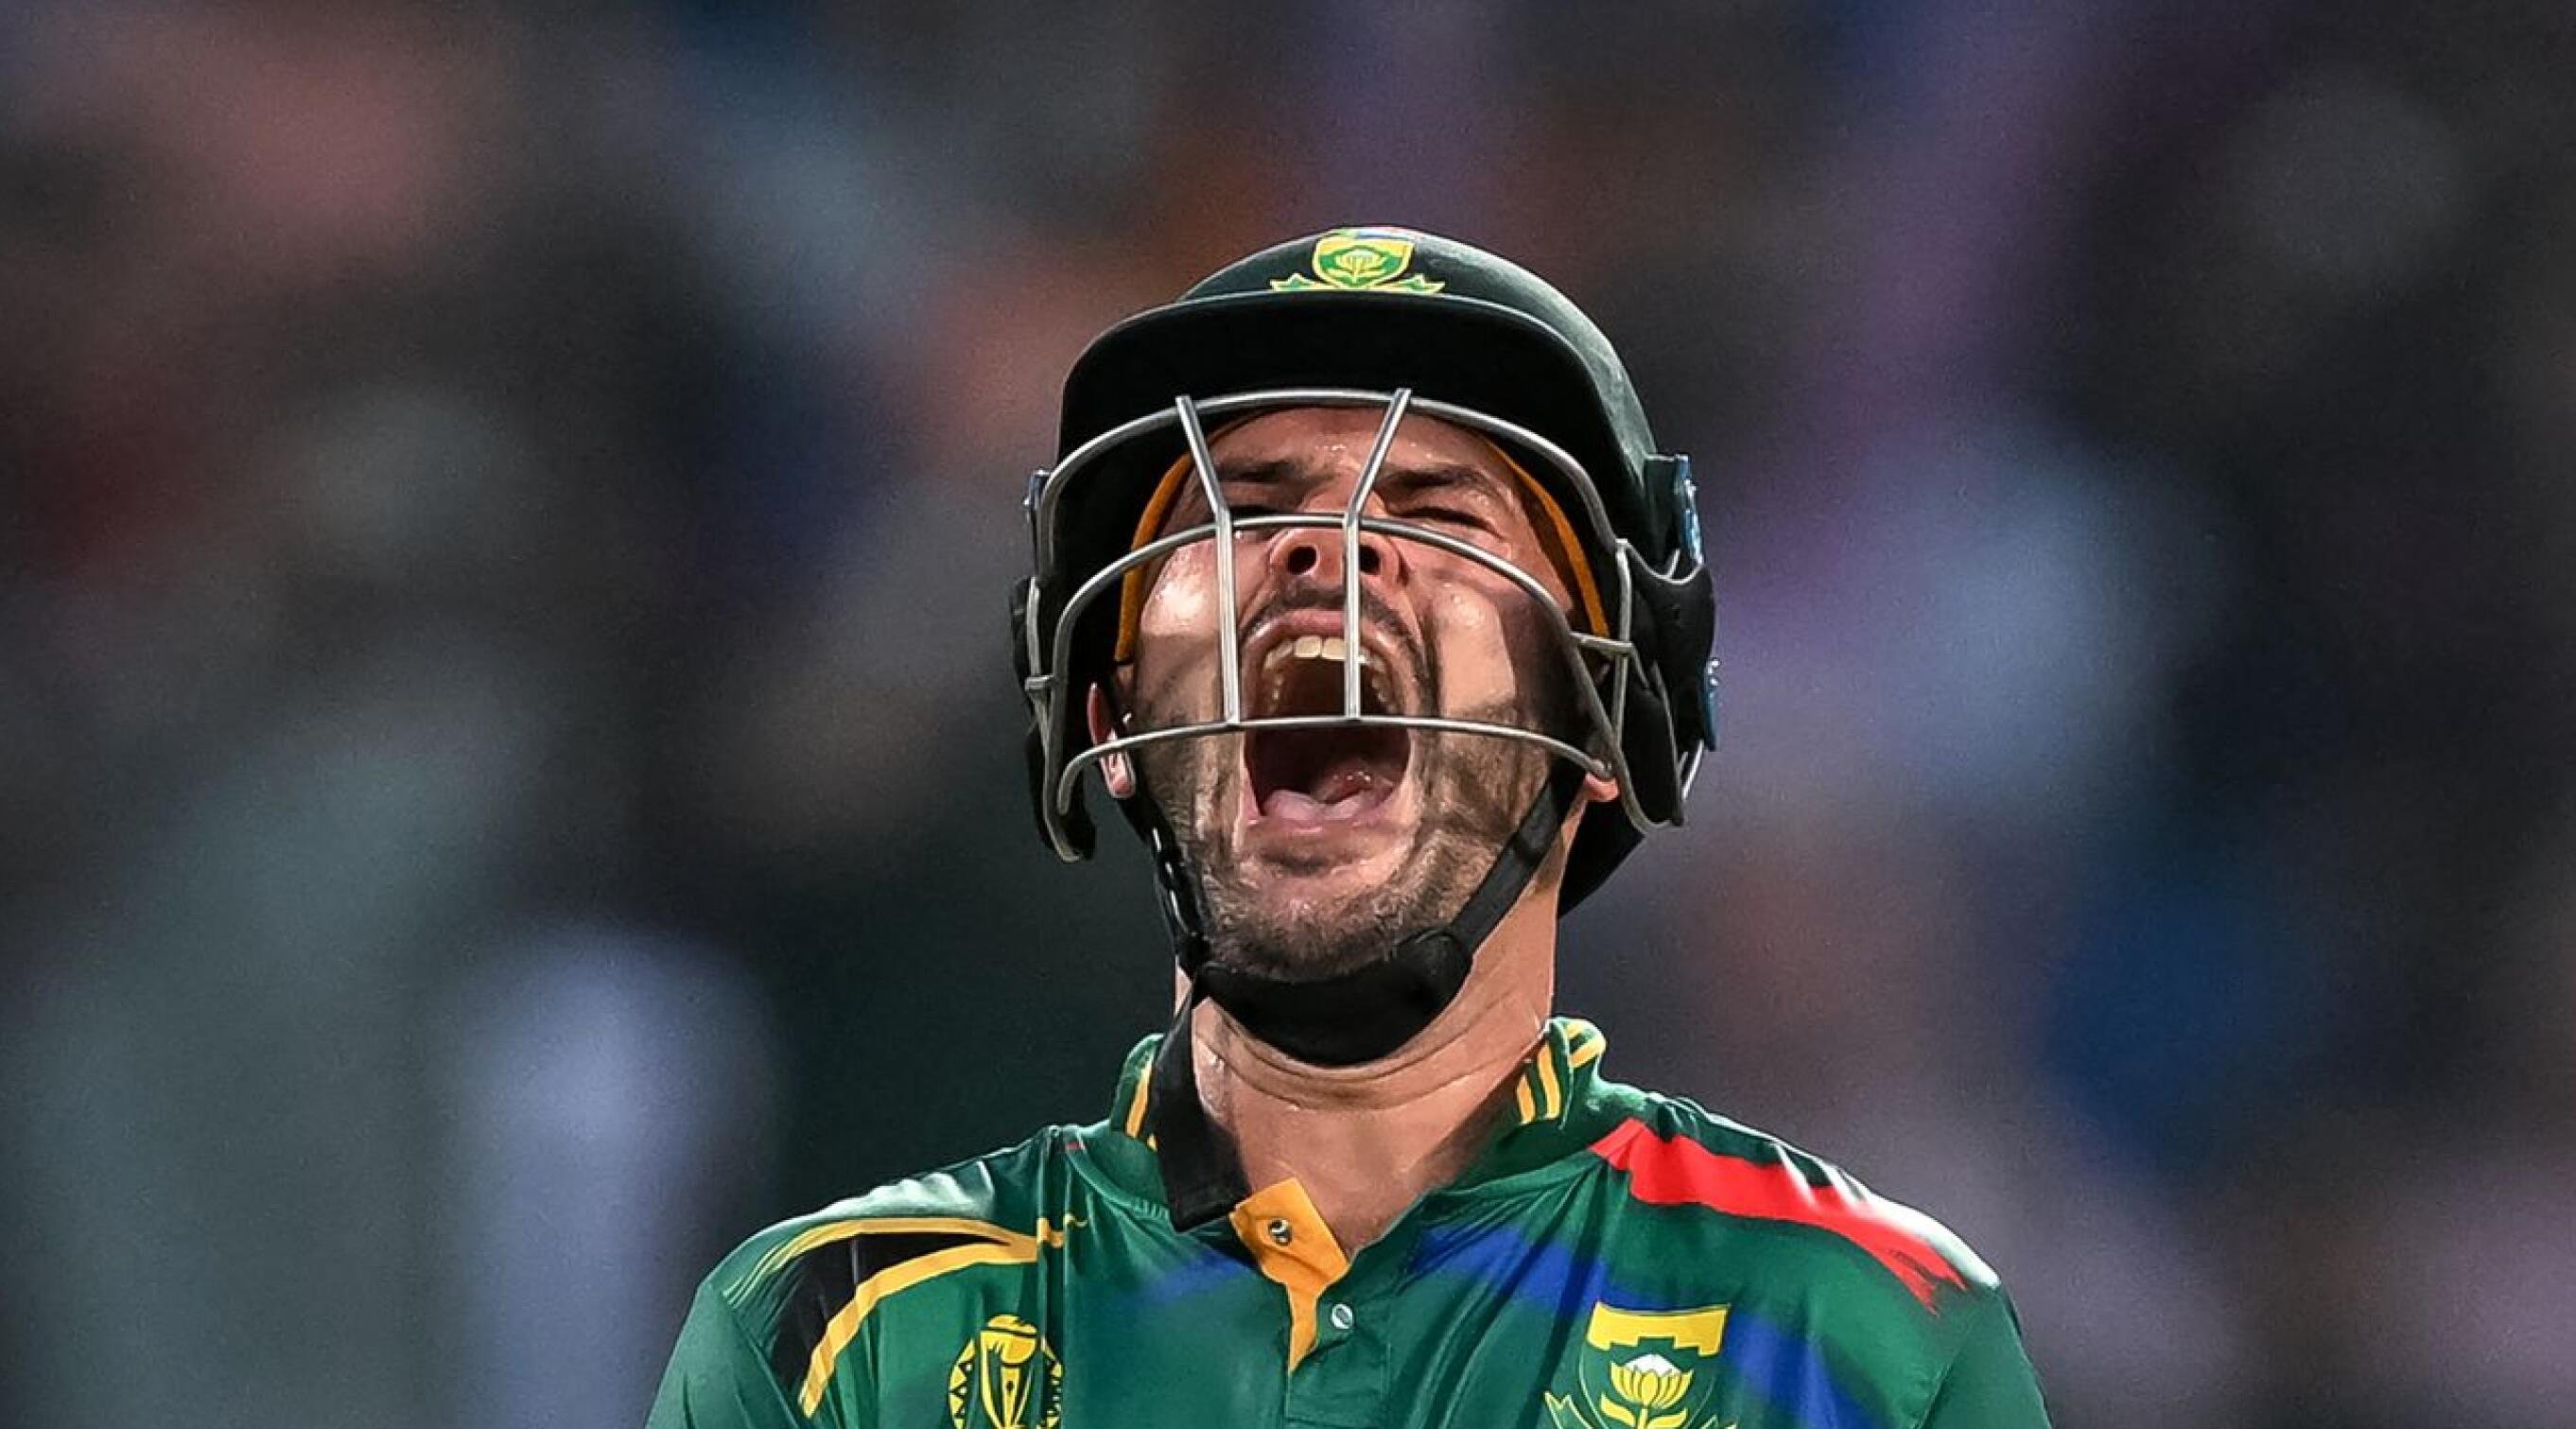 South Africa's Aiden Markram celebrates after scoring a century (100 runs) during the 2023 ICC Men's Cricket World Cup one-day international (ODI) match between South Africa and Sri Lanka at the Arun Jaitley Stadium in New Delhi